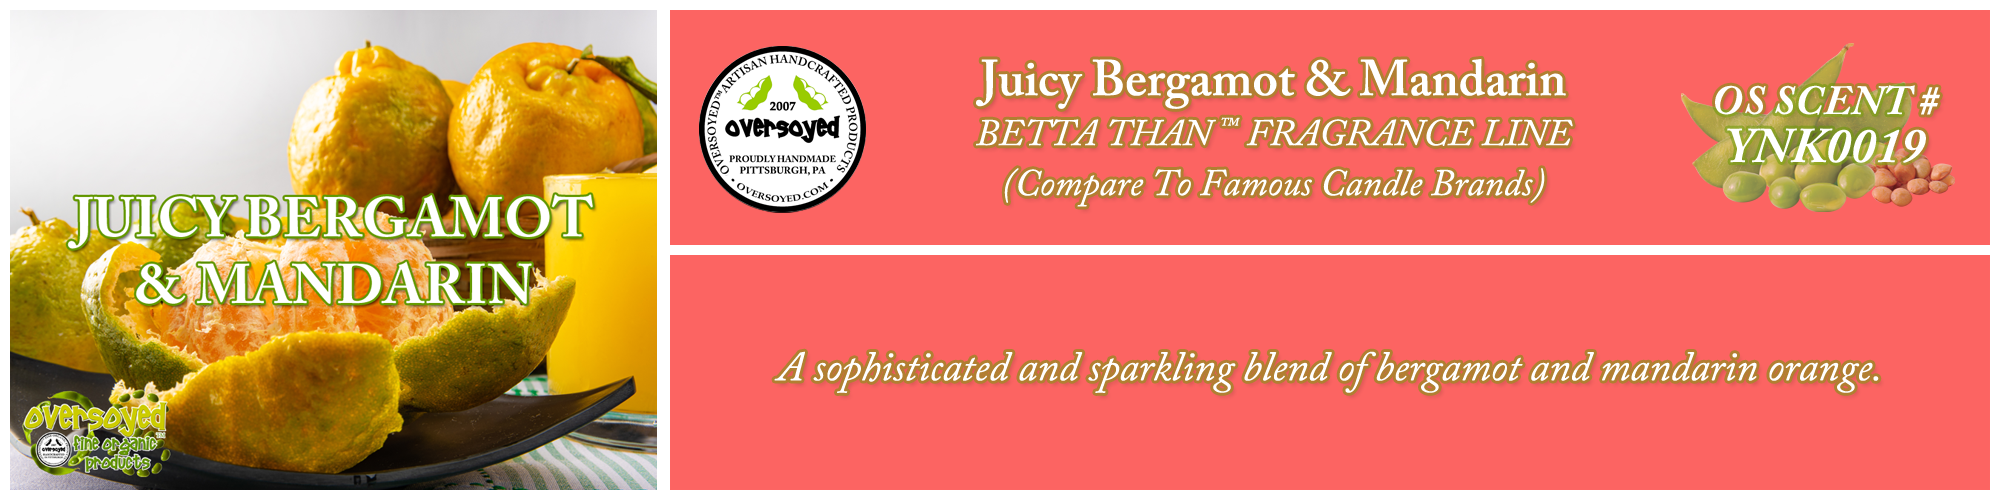 Juicy Bergamot & Mandarin Handcrafted Products Collection